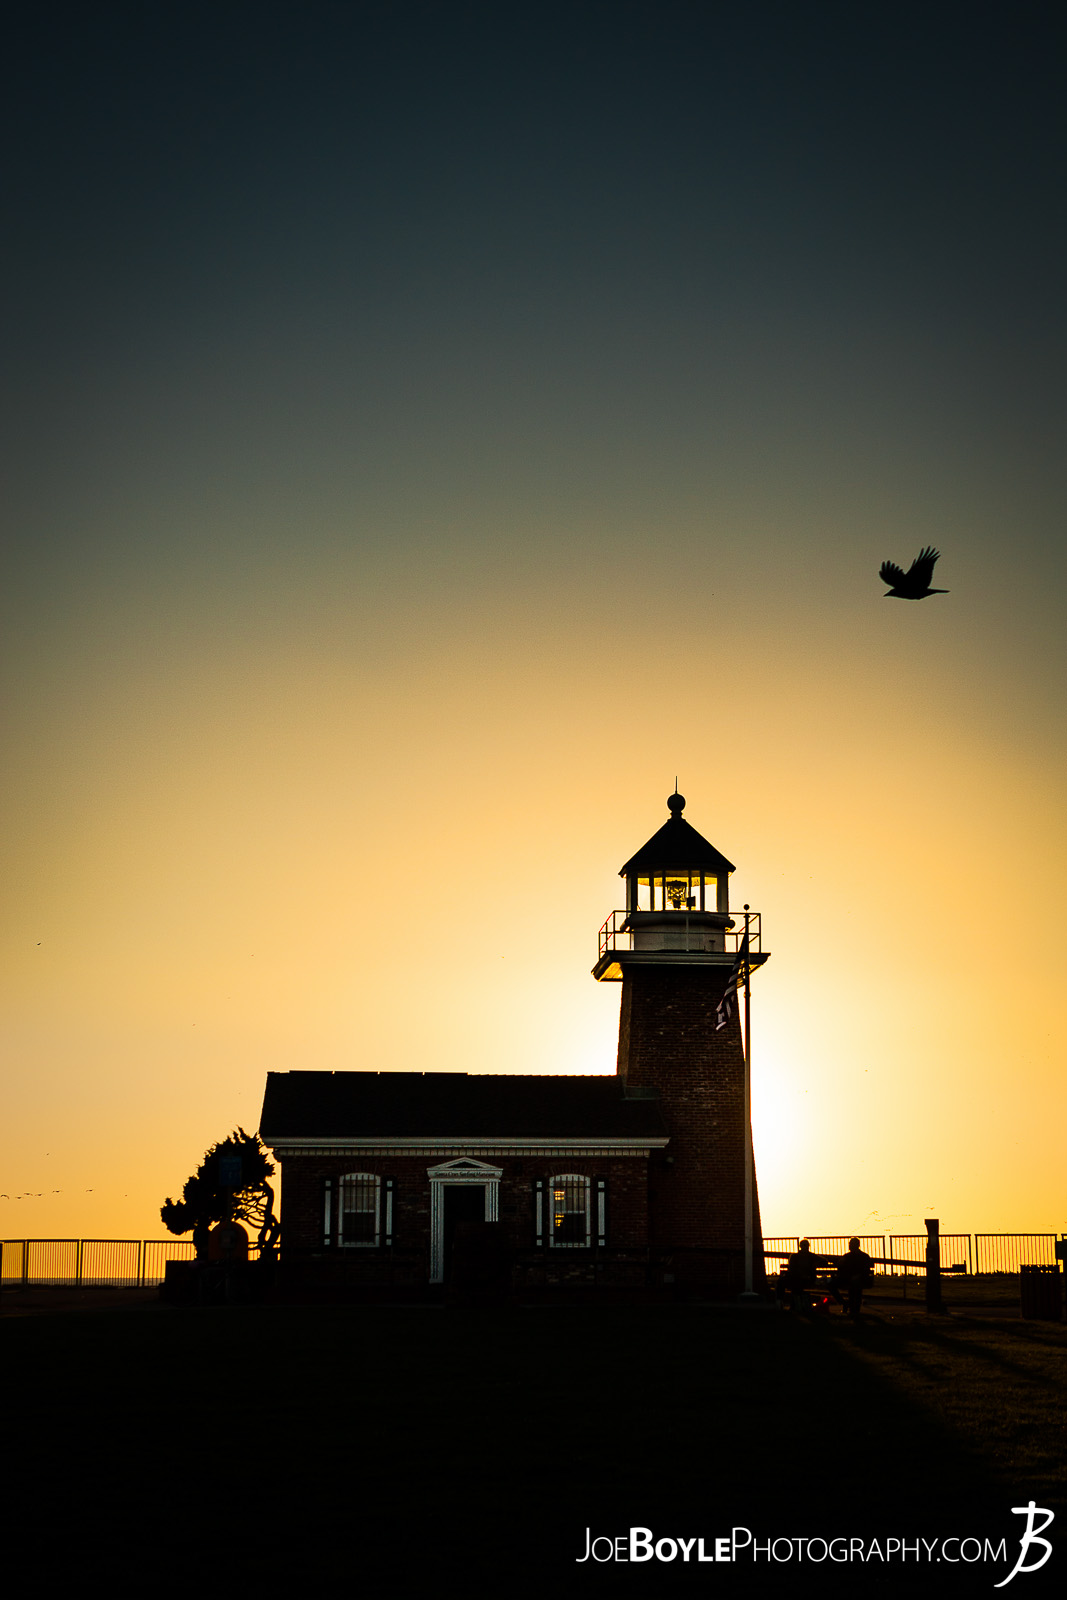  When I was traveling to California I made a stop in Santa Cruz and as I was driving around I came across this: The Surfer's Lighthouse Historical Museum. You couldn't go inside but it did make a cool silhouette against the setting sun! 